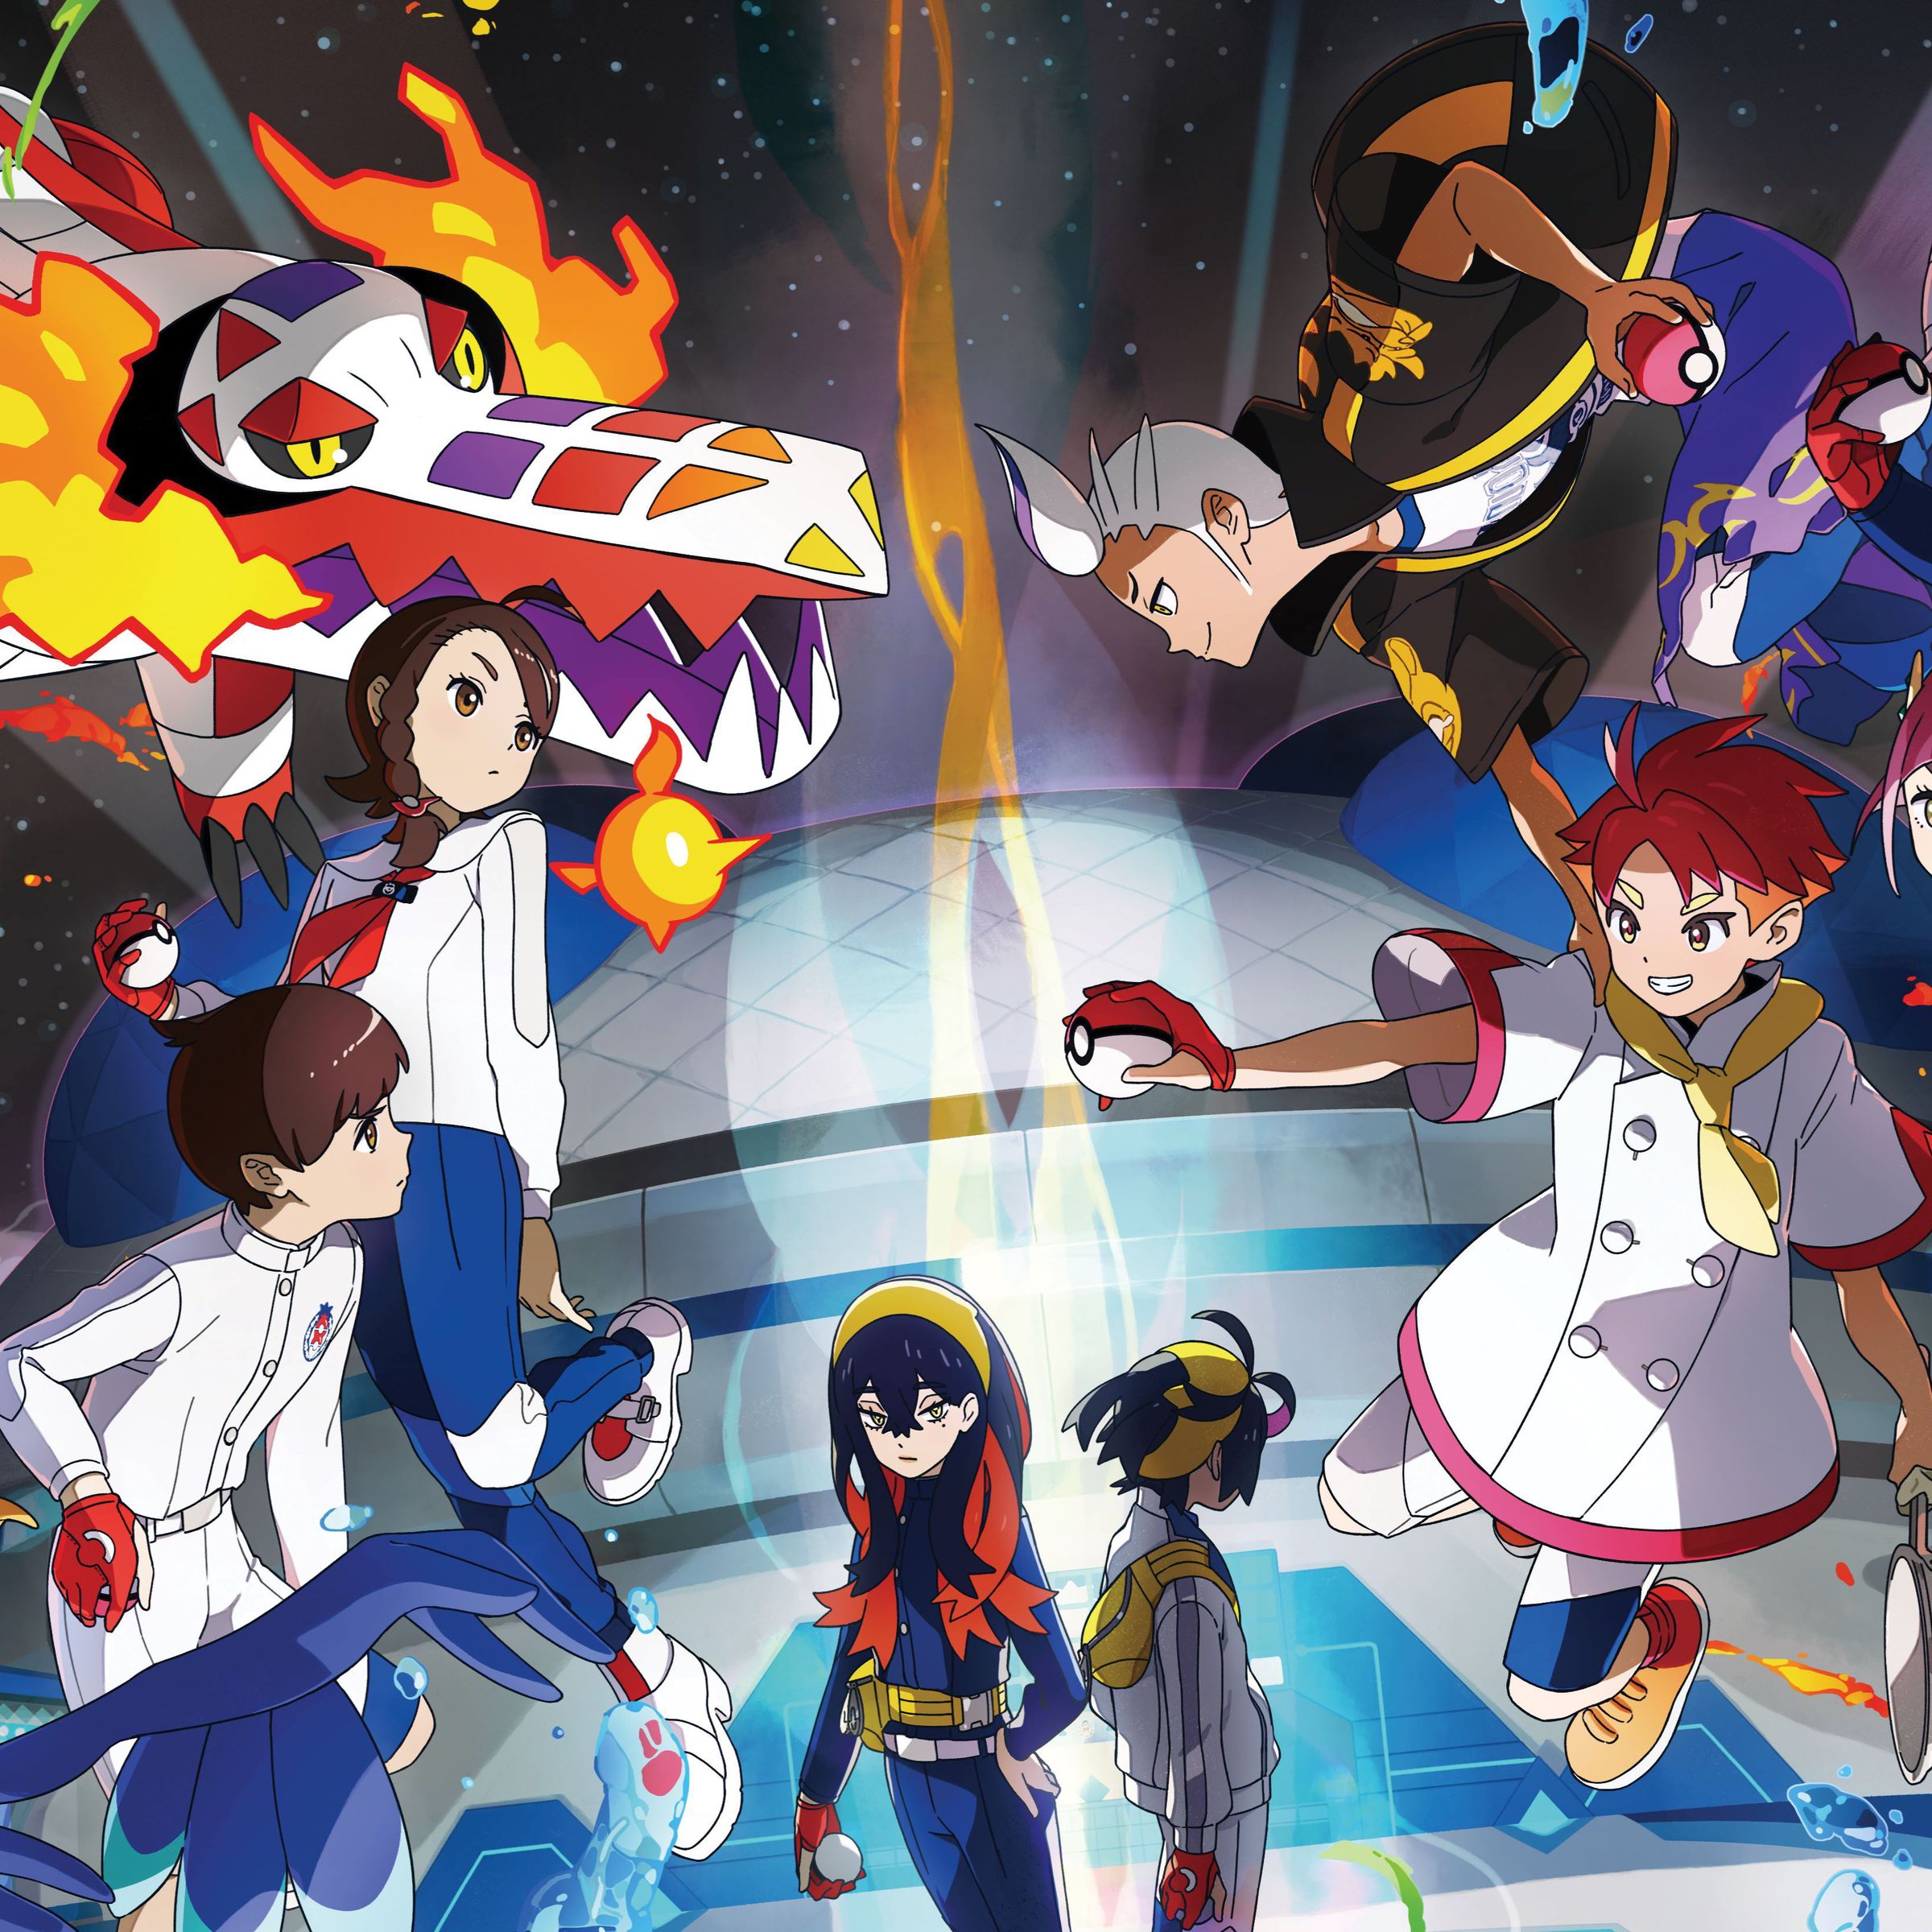 A group of student pokémon trainers and their monster parters squaring off with a group of older trainers and their pokémon.